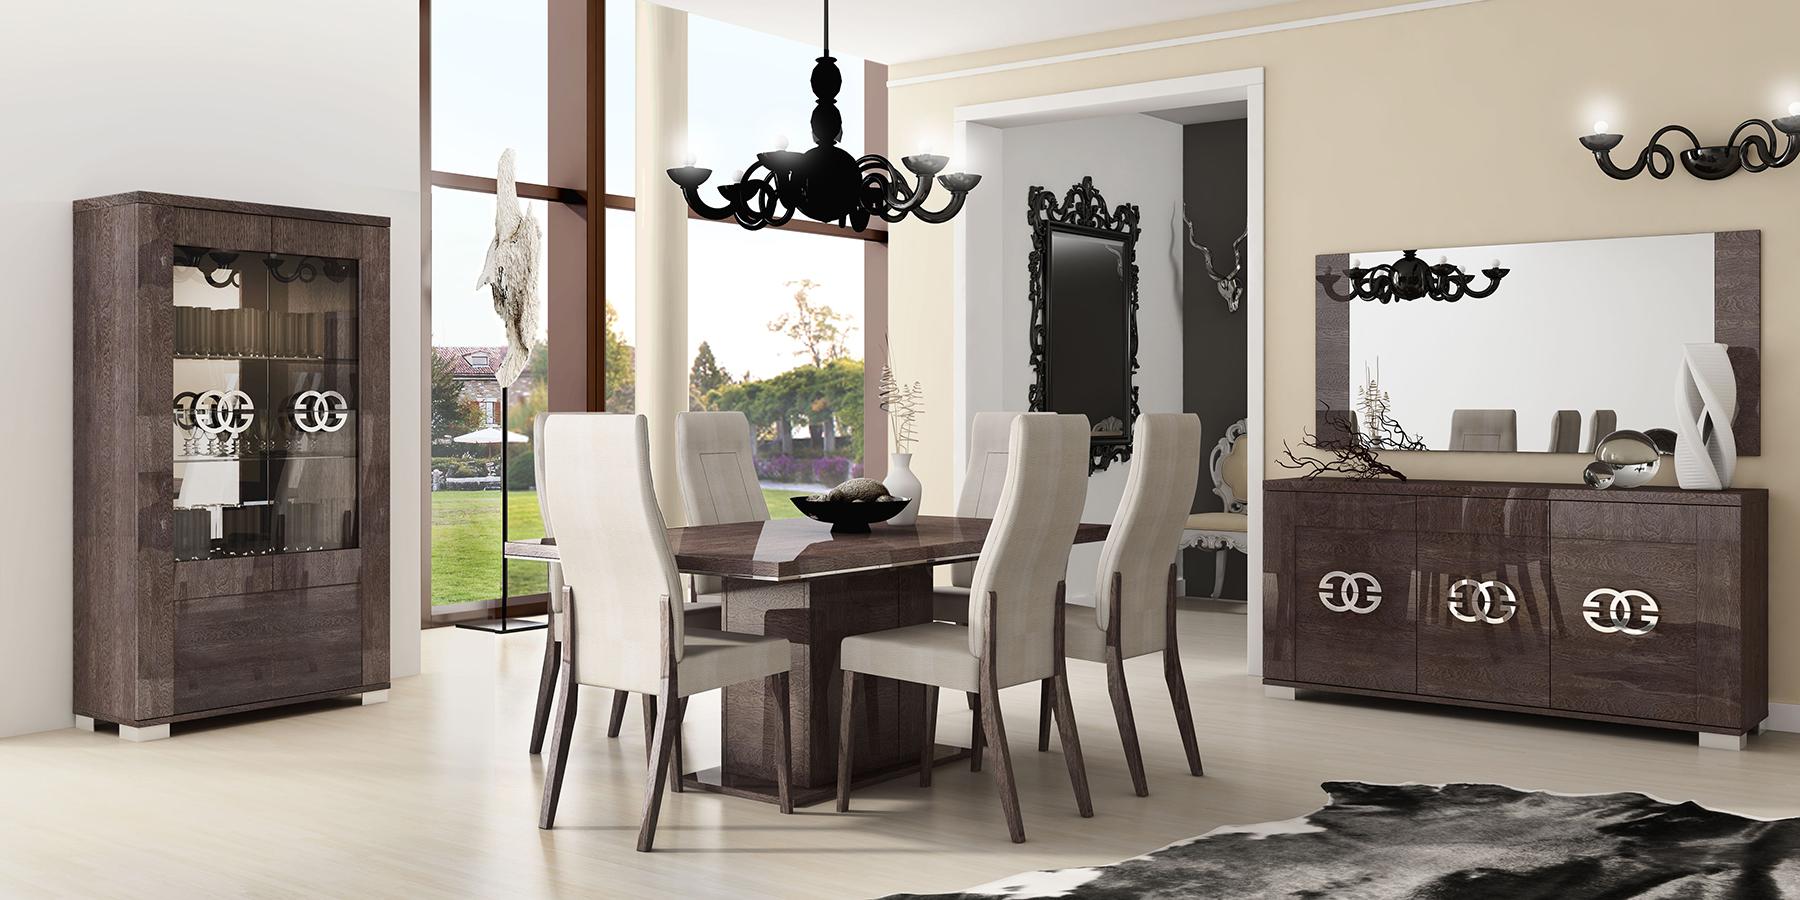 

    
PRESTIGETABLE High Gloss Wenge  Dining Table w/ Extension Modern Made in Italy ESF Prestige
